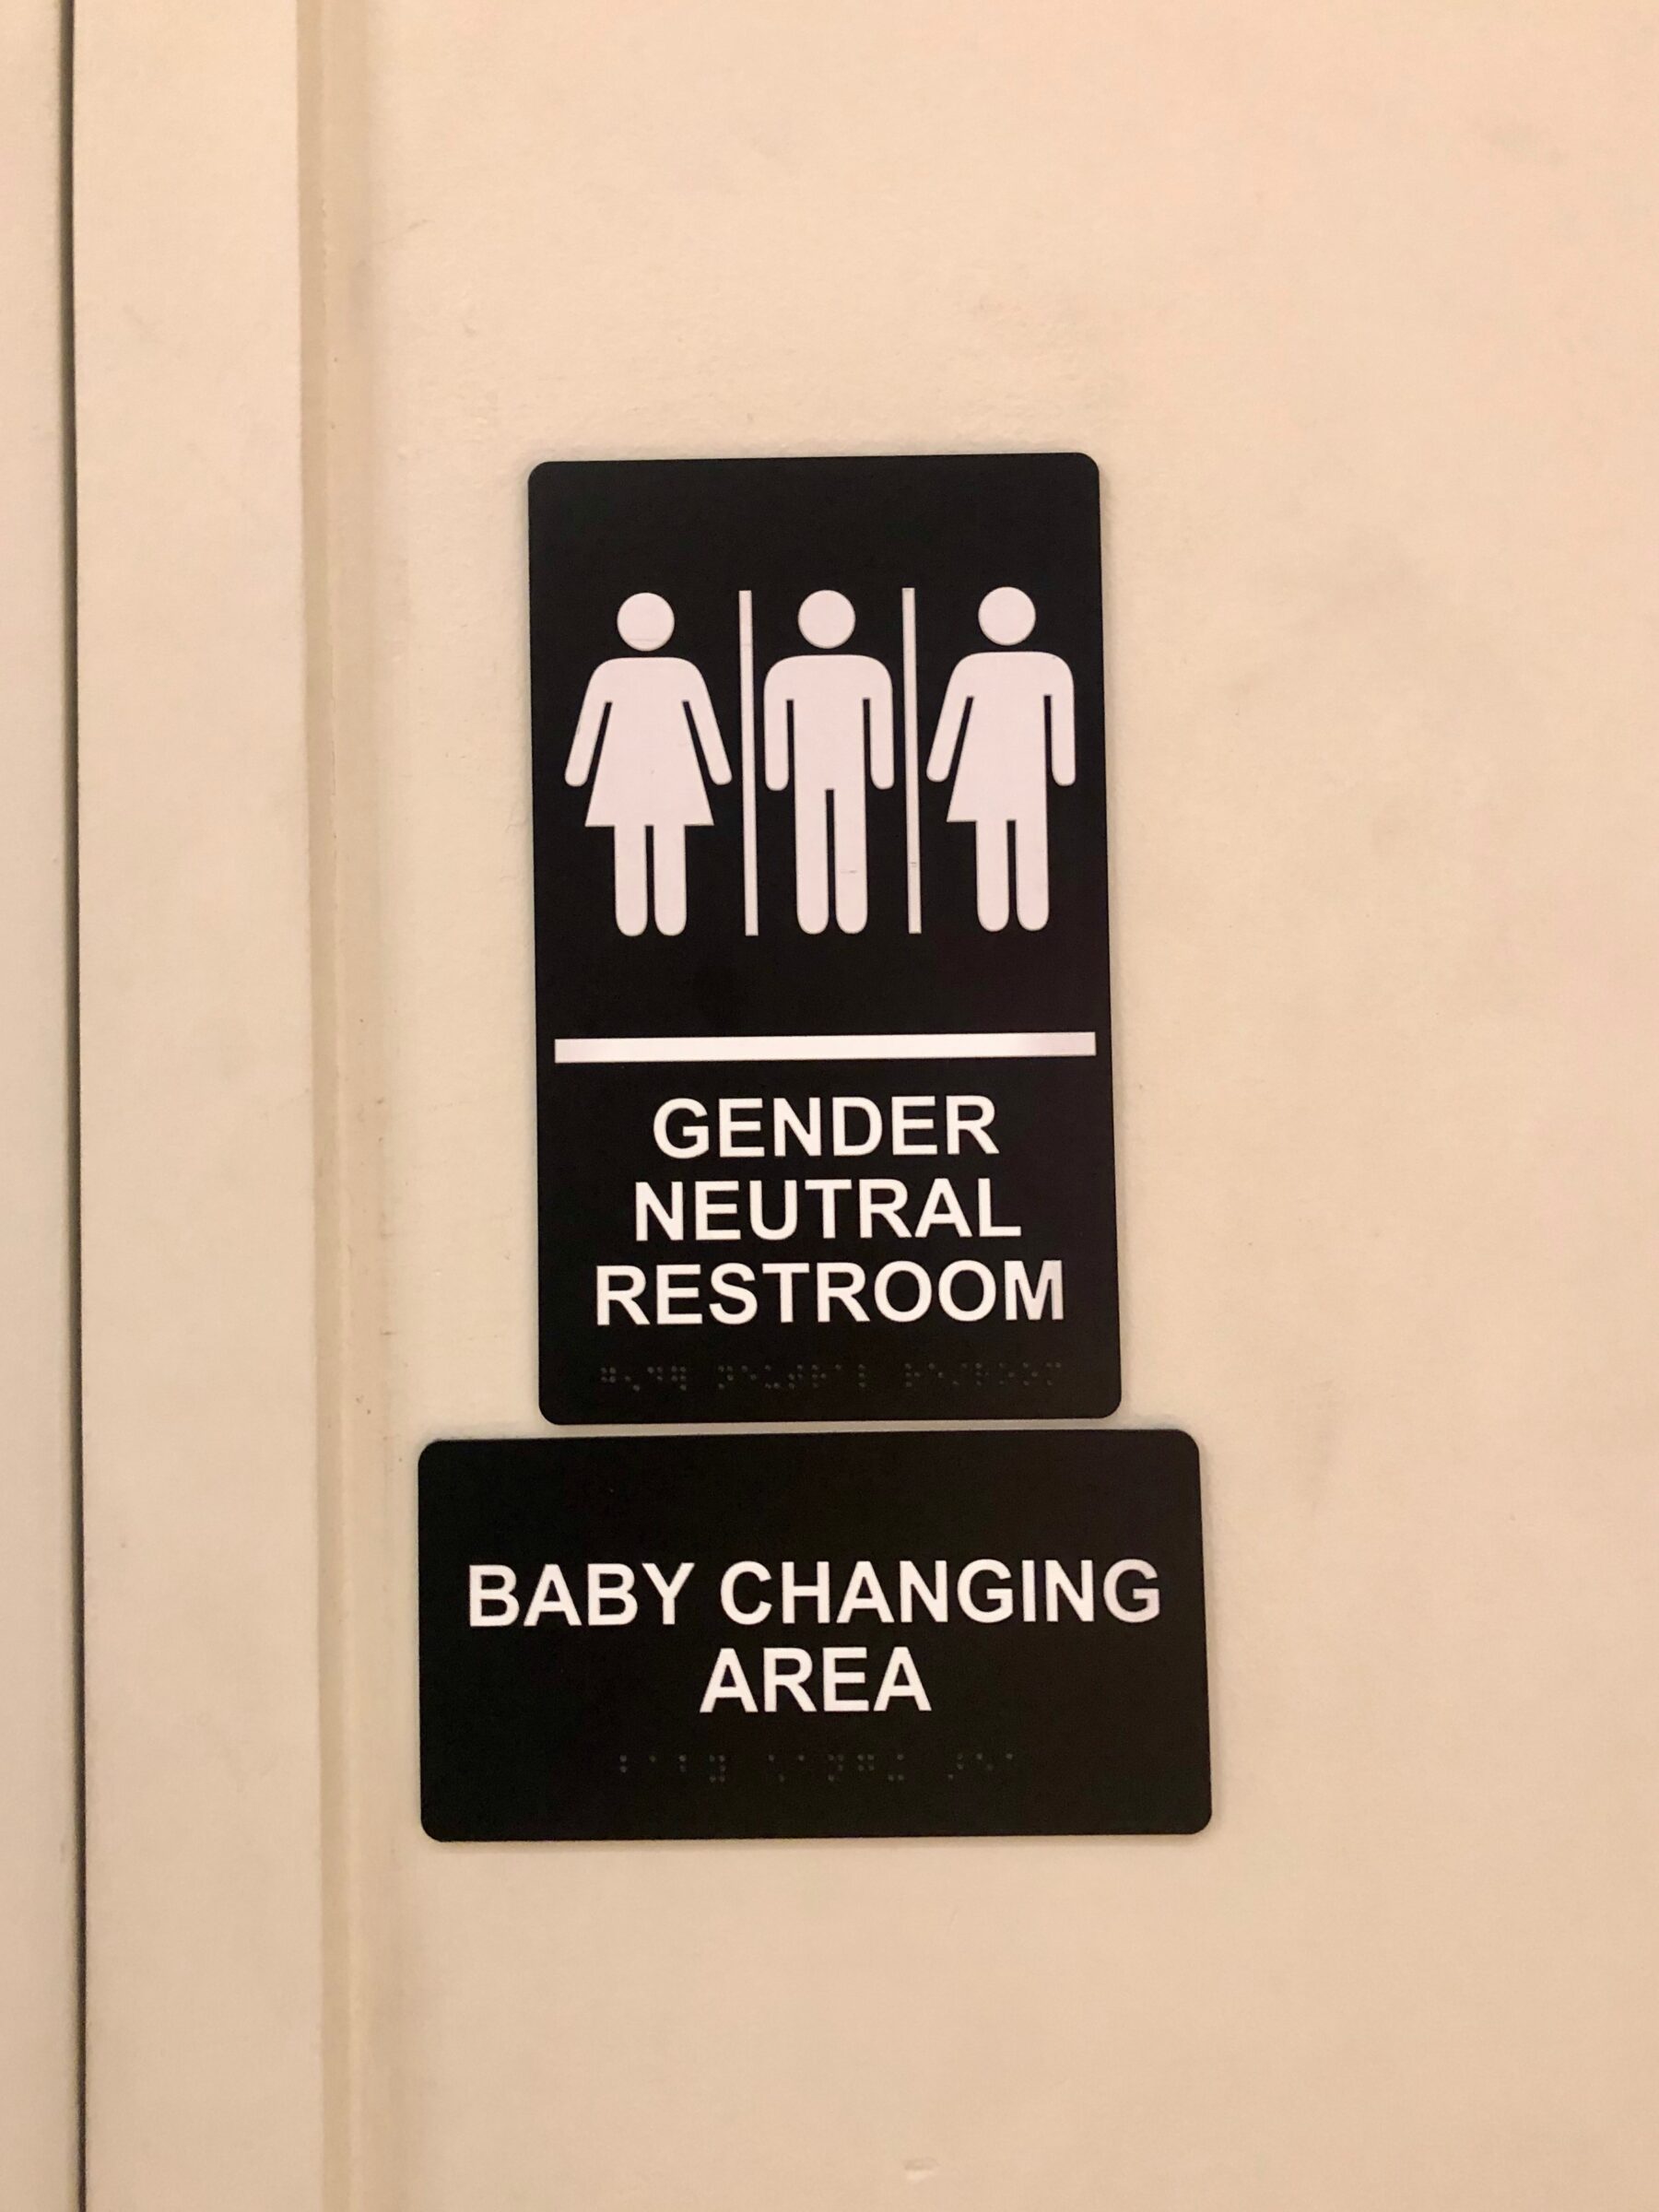 Gender Neutral Restroom sign with baby changing facilities